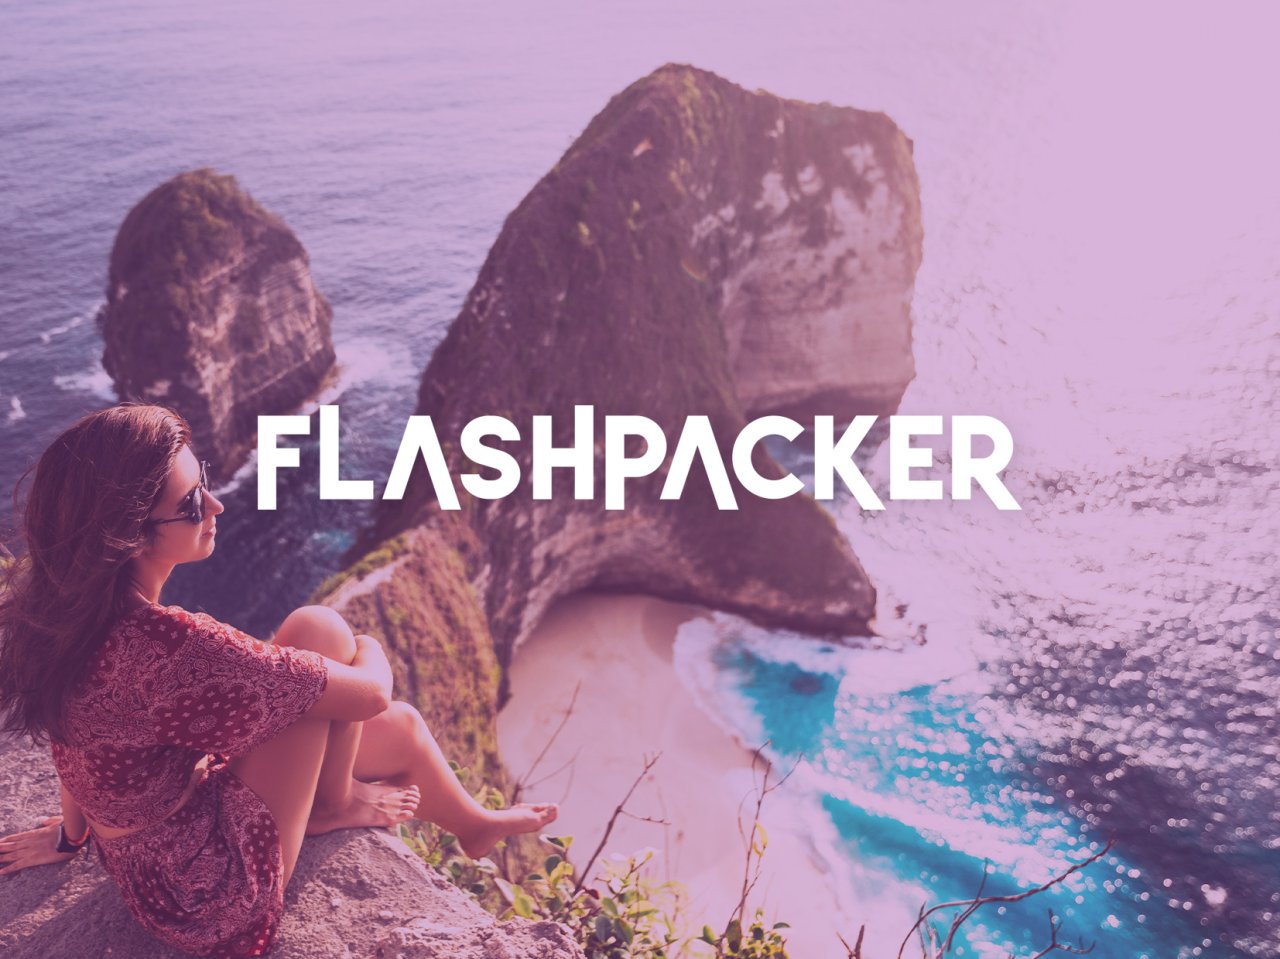 flashpacker travel meaning